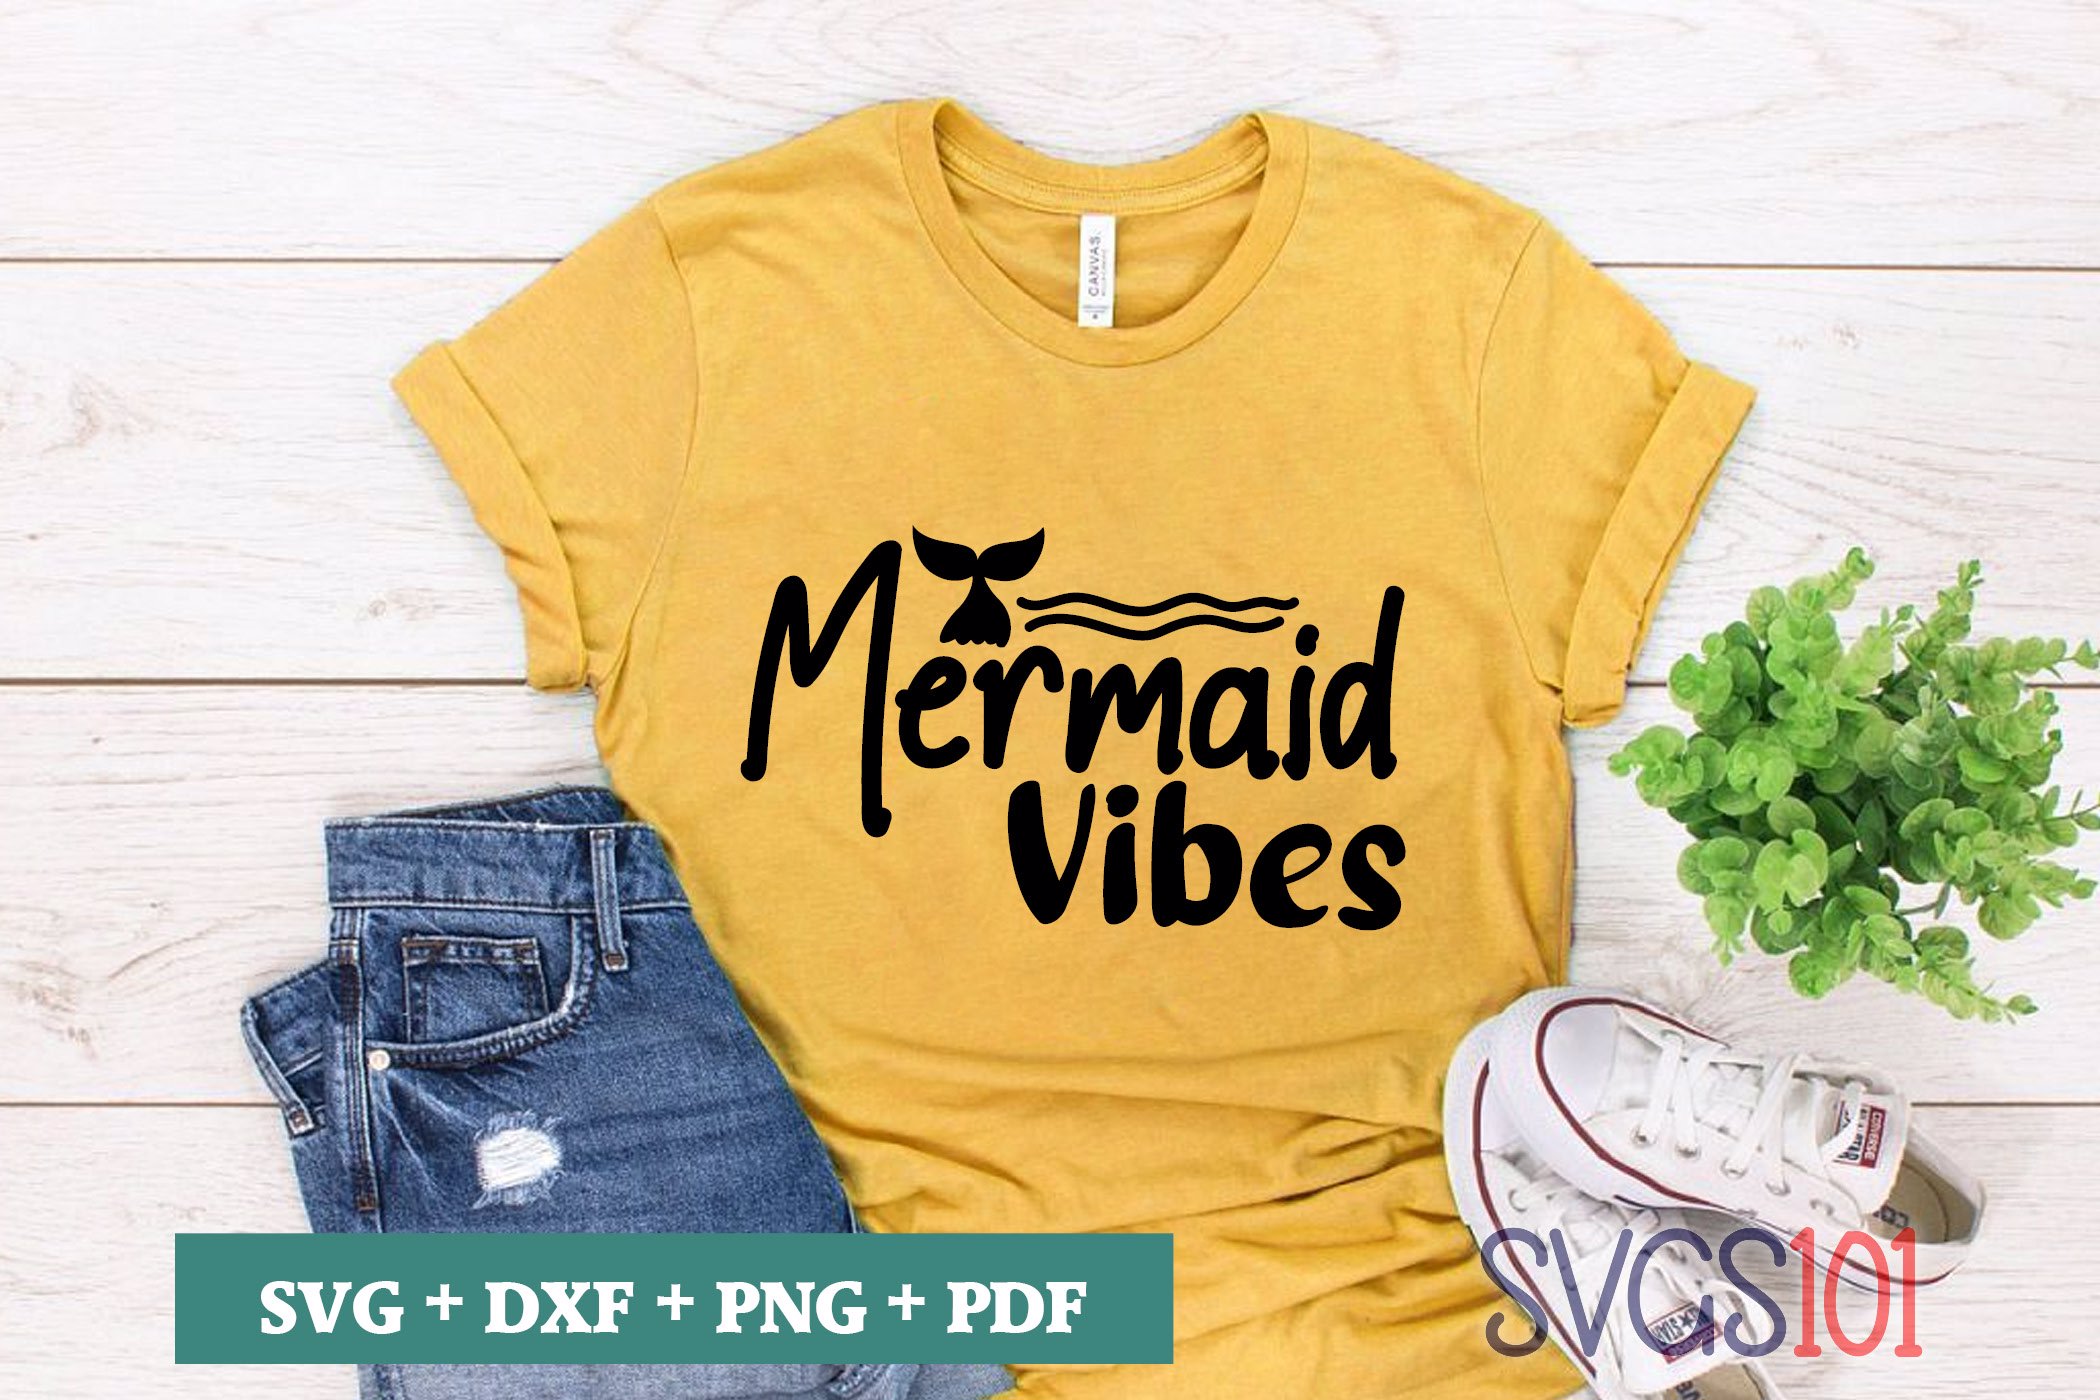 Download Mermaid Vibes SVG Cuttable file - DXF, EPS, PNG, PDF | SVG ...